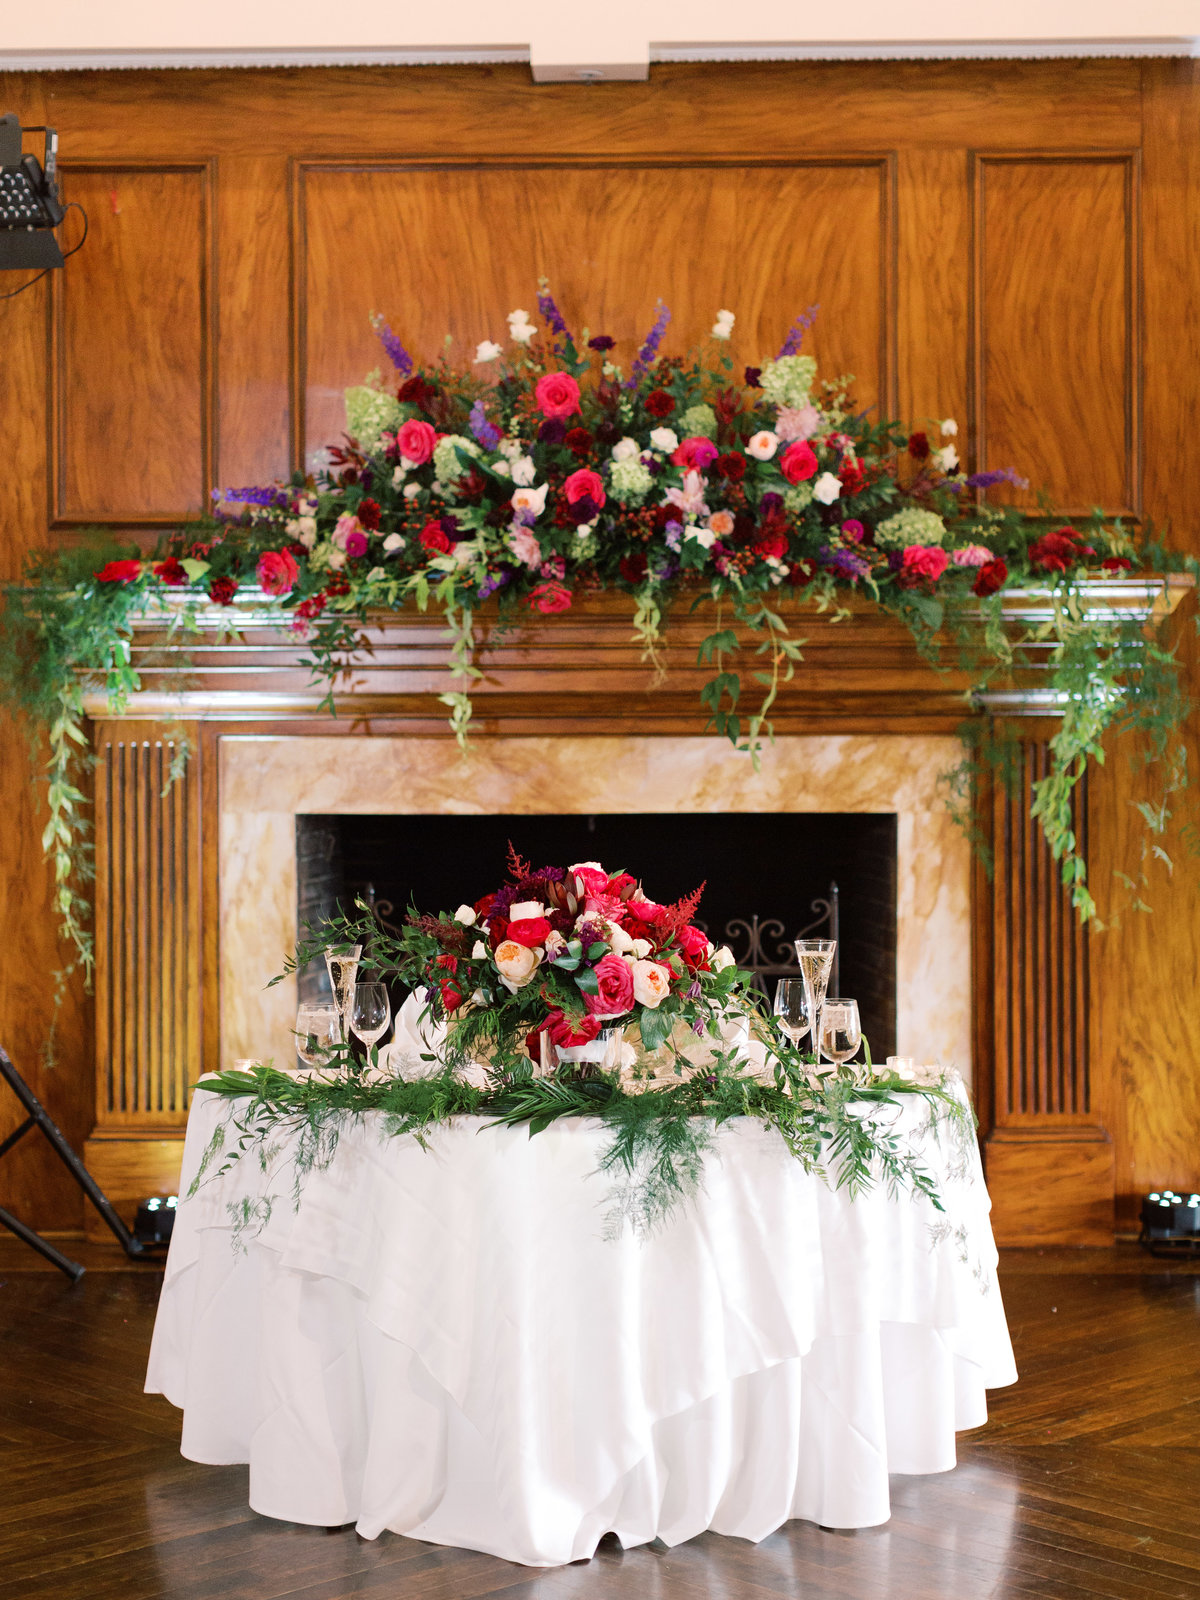 Sweetheart table with jewel toned flowers and a mantel floral arrangement as a backdrop